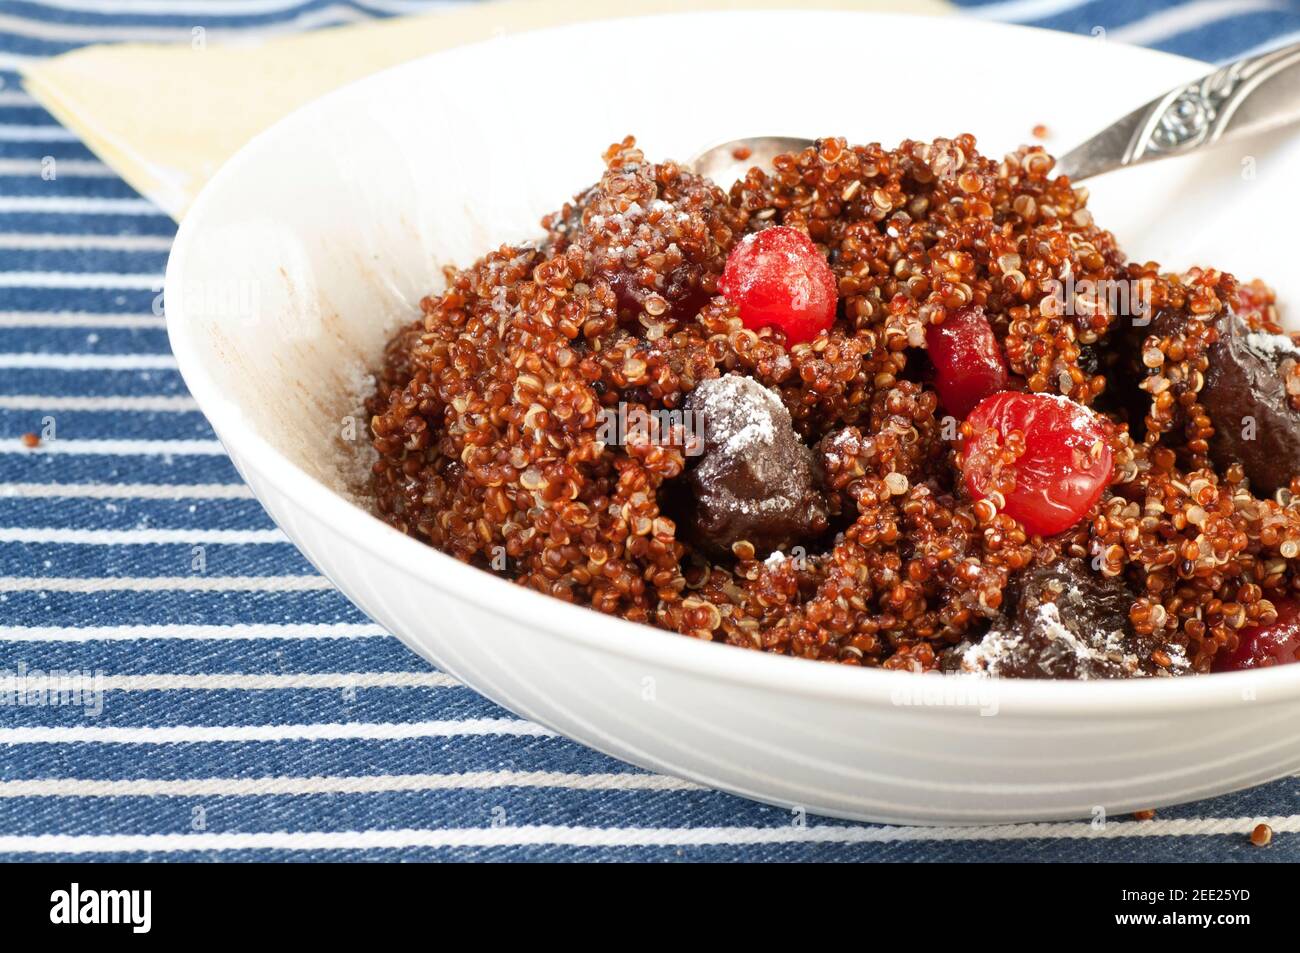 Dessert from boiled quinoa seeds with pdried plums and cherries sprinkled with sugar in plate on blues tripes table cloth. Stock Photo